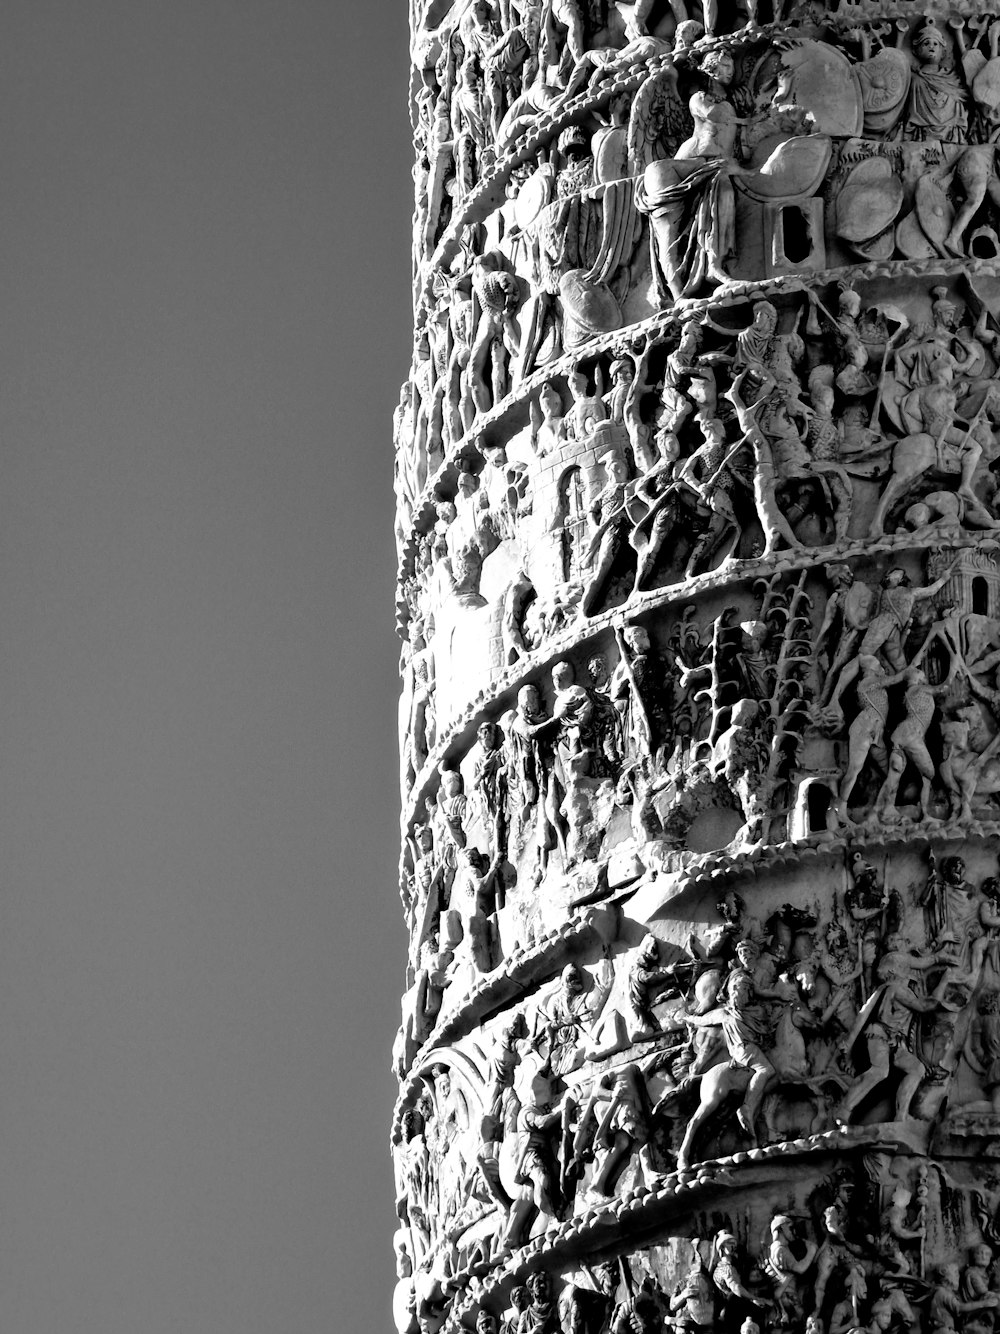 a close up of a pillar with many carvings on it